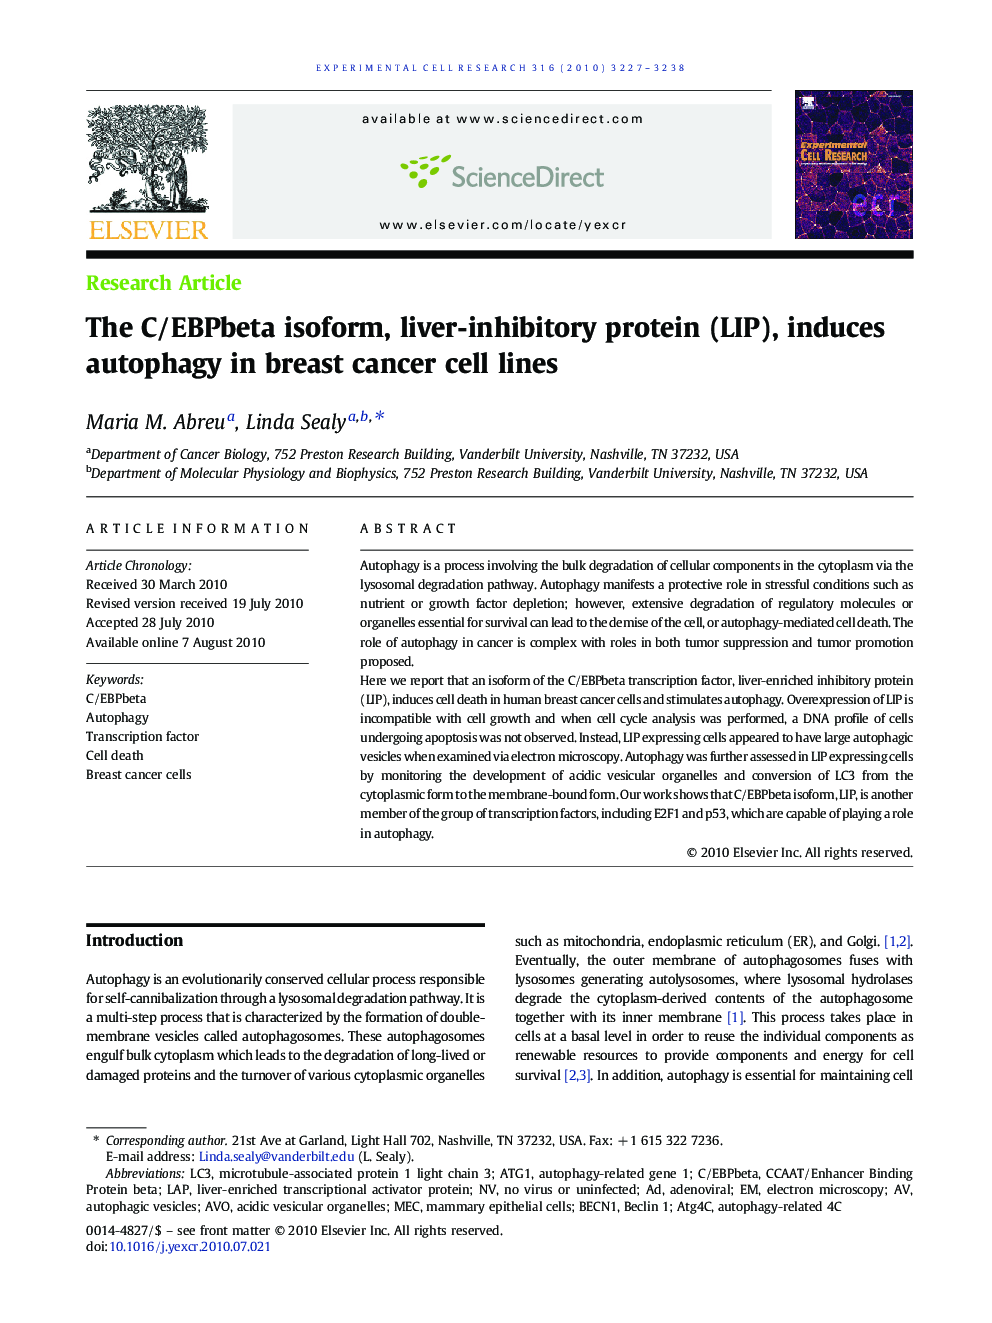 The C/EBPbeta isoform, liver-inhibitory protein (LIP), induces autophagy in breast cancer cell lines